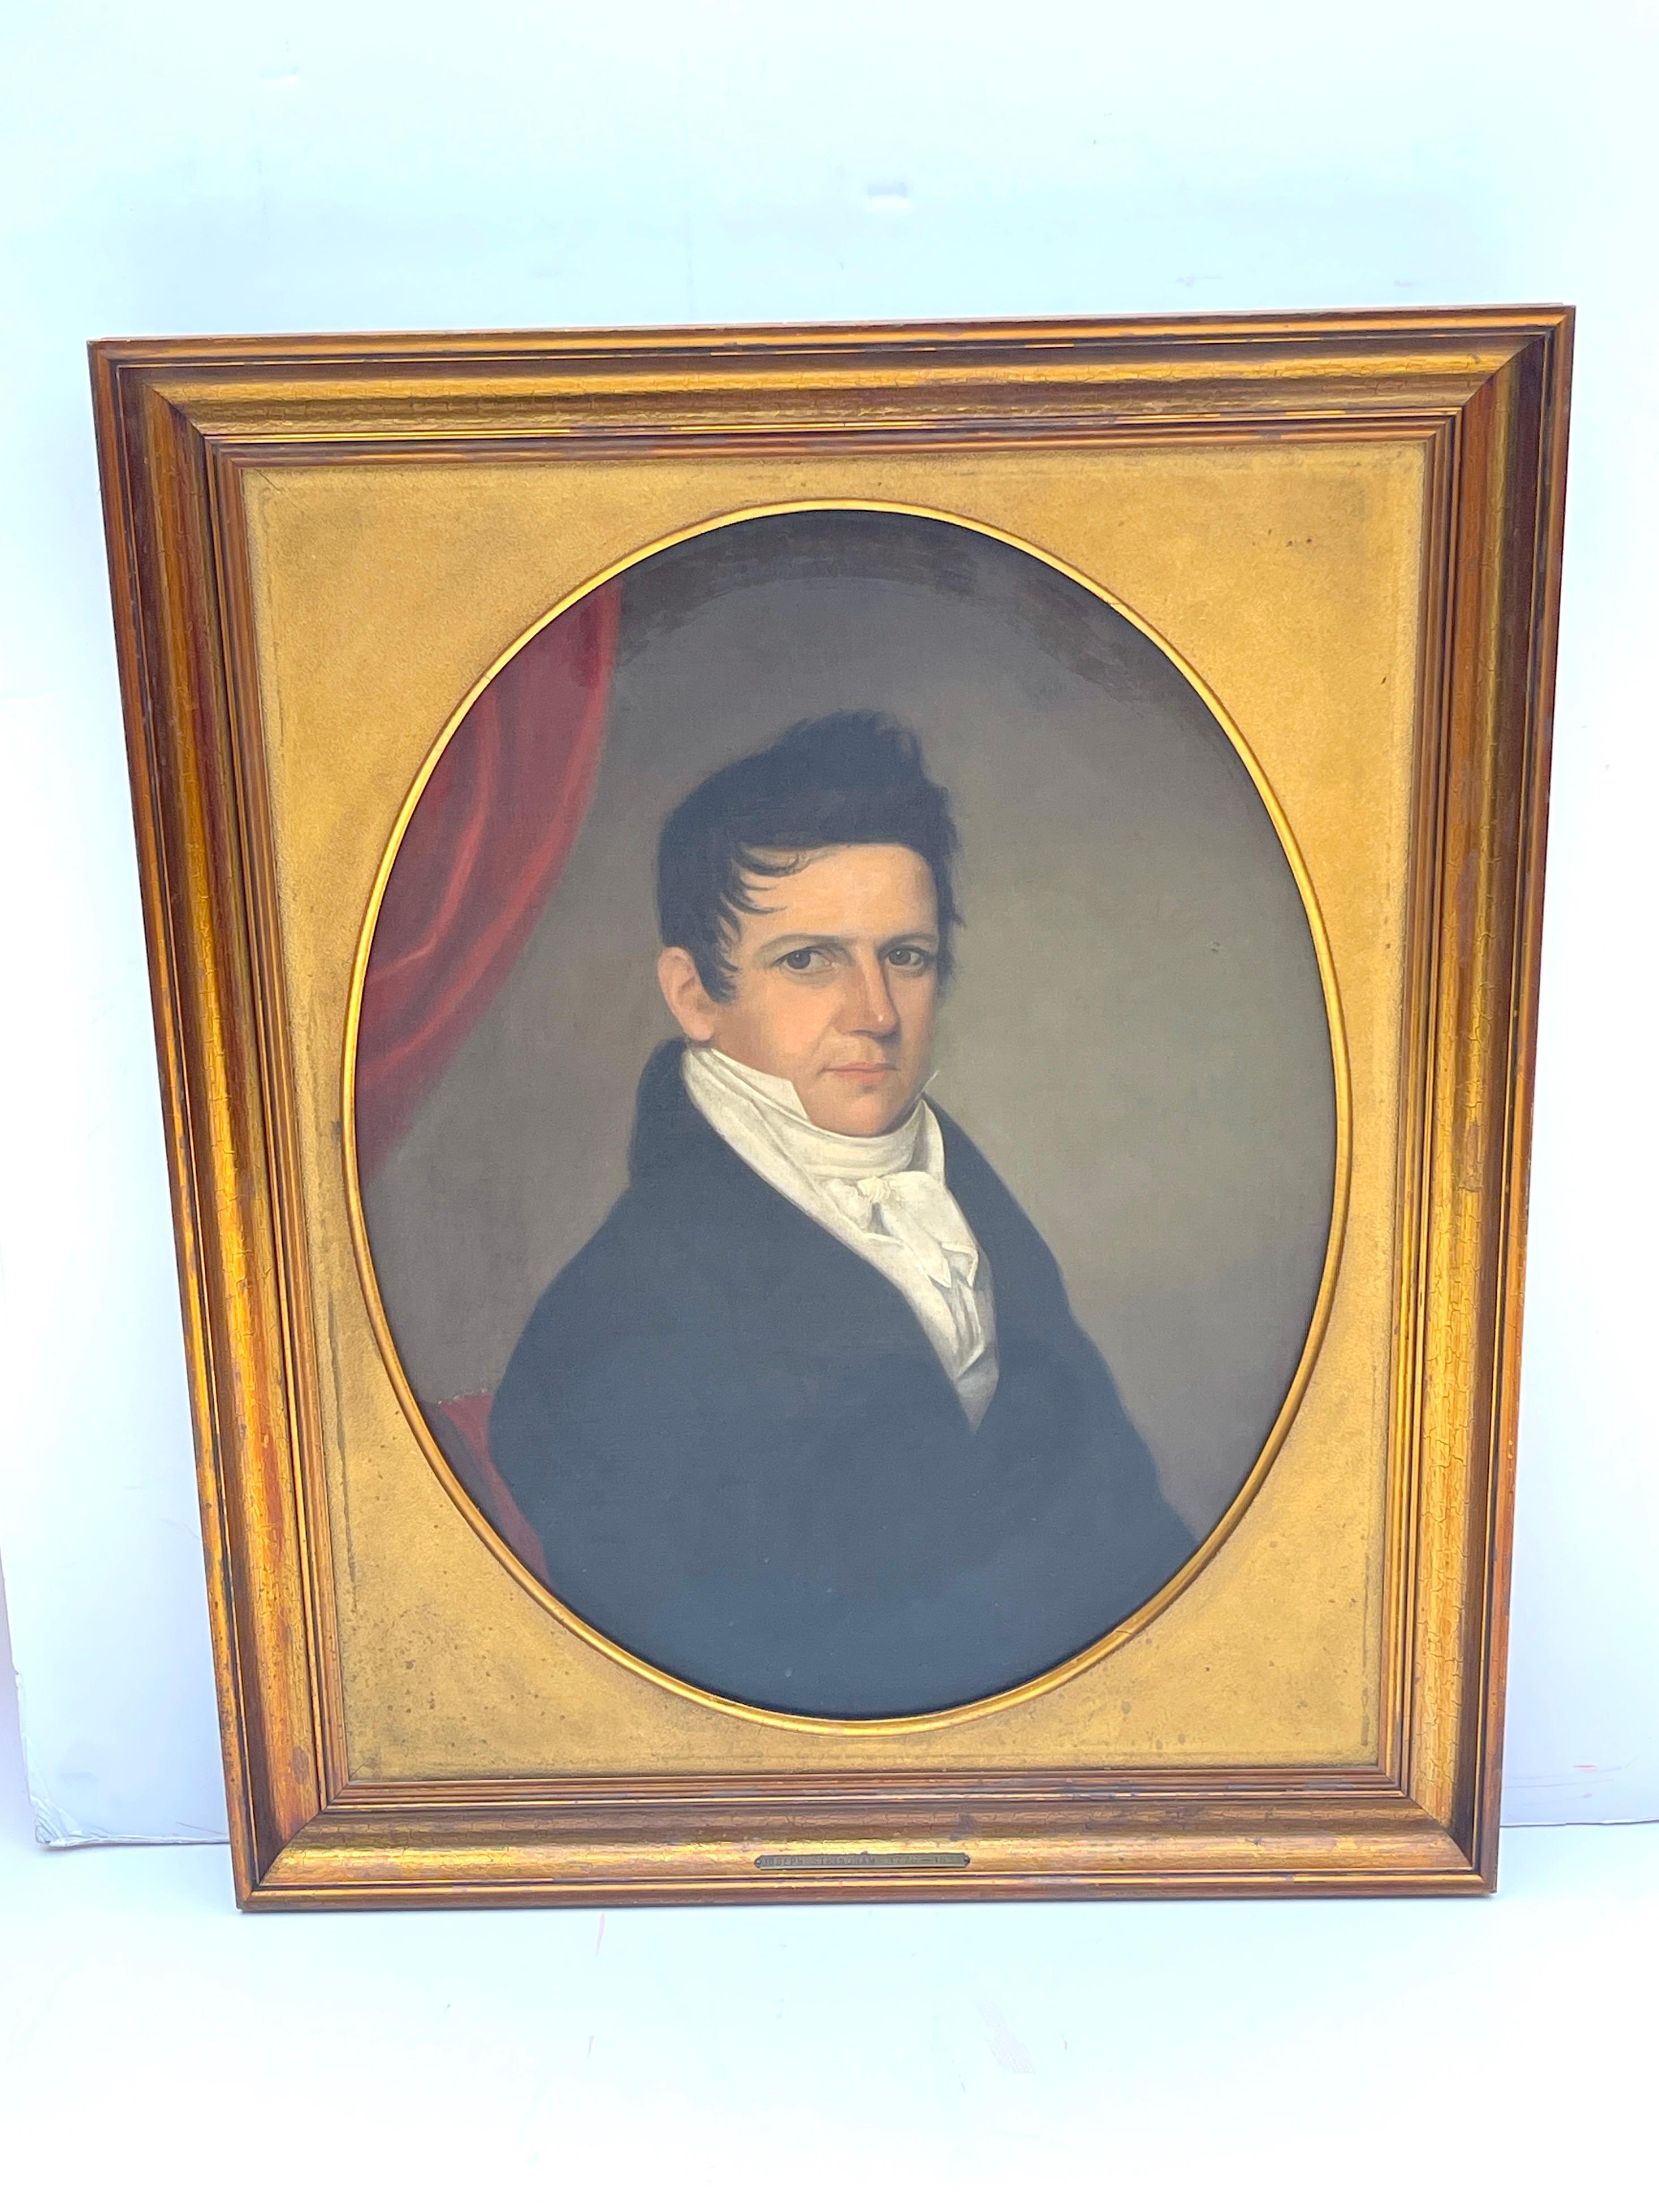 19th century American Portrait of Joseph Stringham (1776-1834)
Oil on Canvas
Later Giltwood Frame

Presenting an exquisite 19th-century American Portrait of Joseph Stringham (1776-1834), captured in oil on canvas and elegantly framed in a later